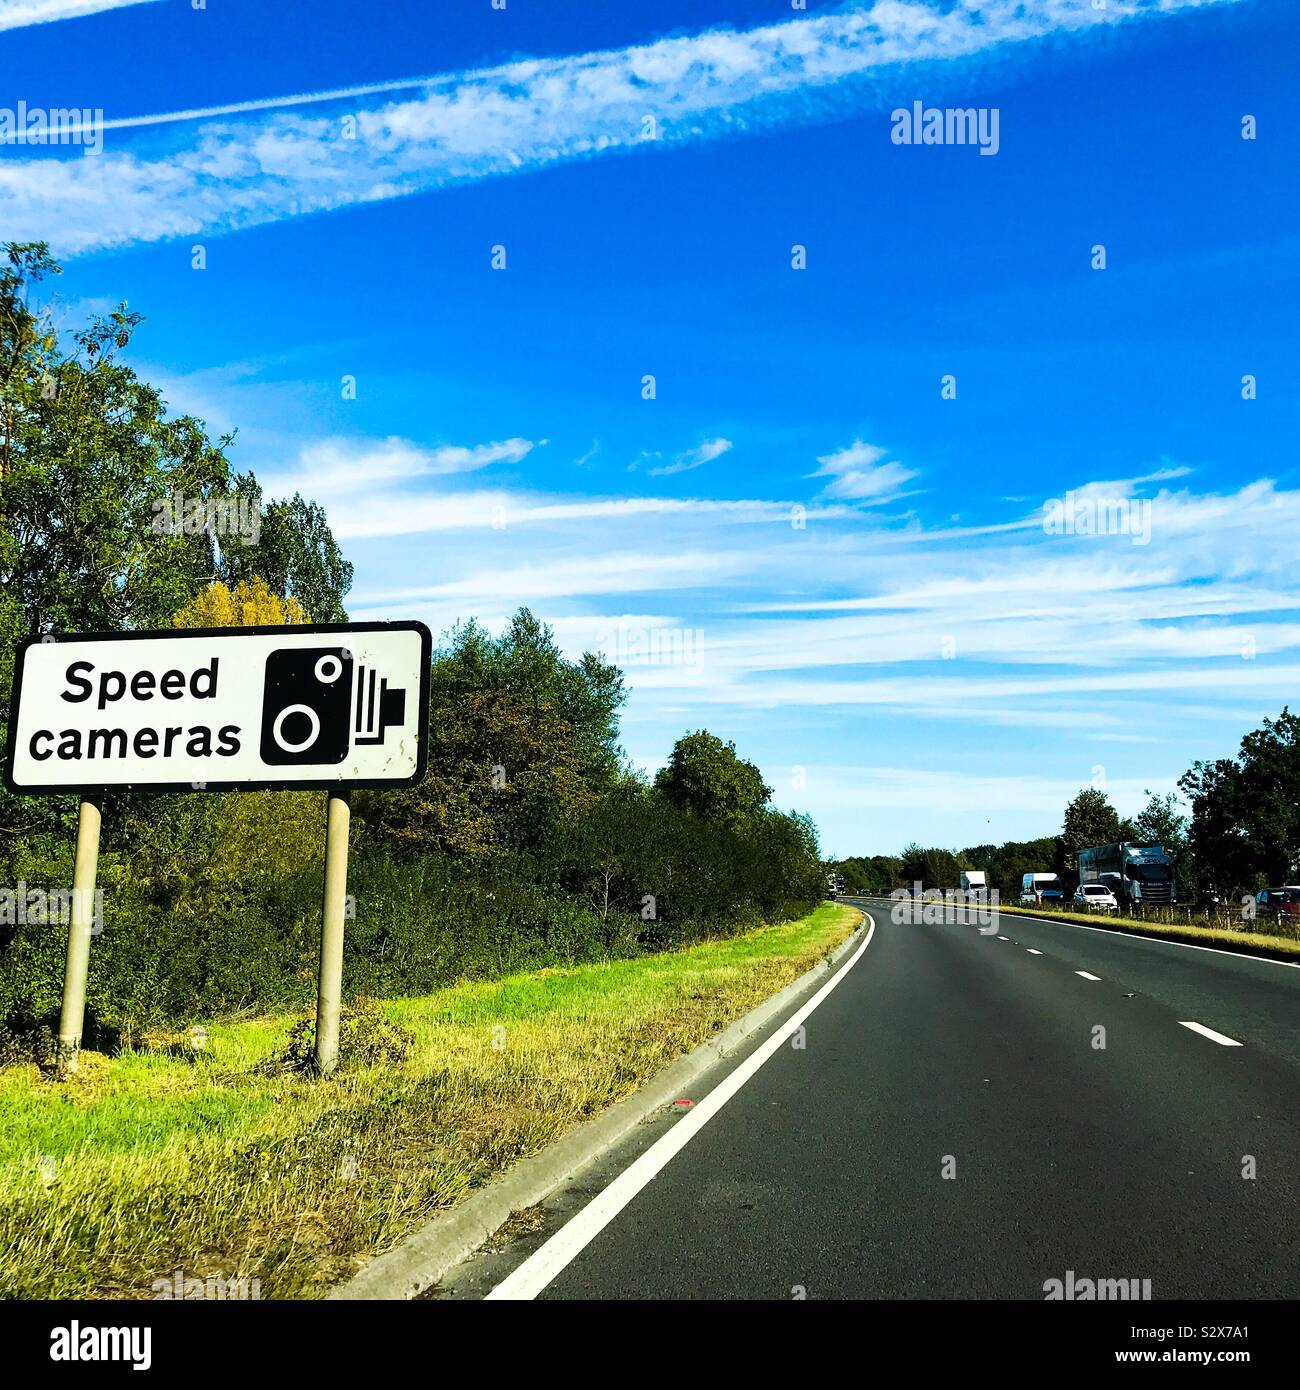 A speed cameras warning sign on the grass verge side of a dual carriageway road in the UK Stock Photo